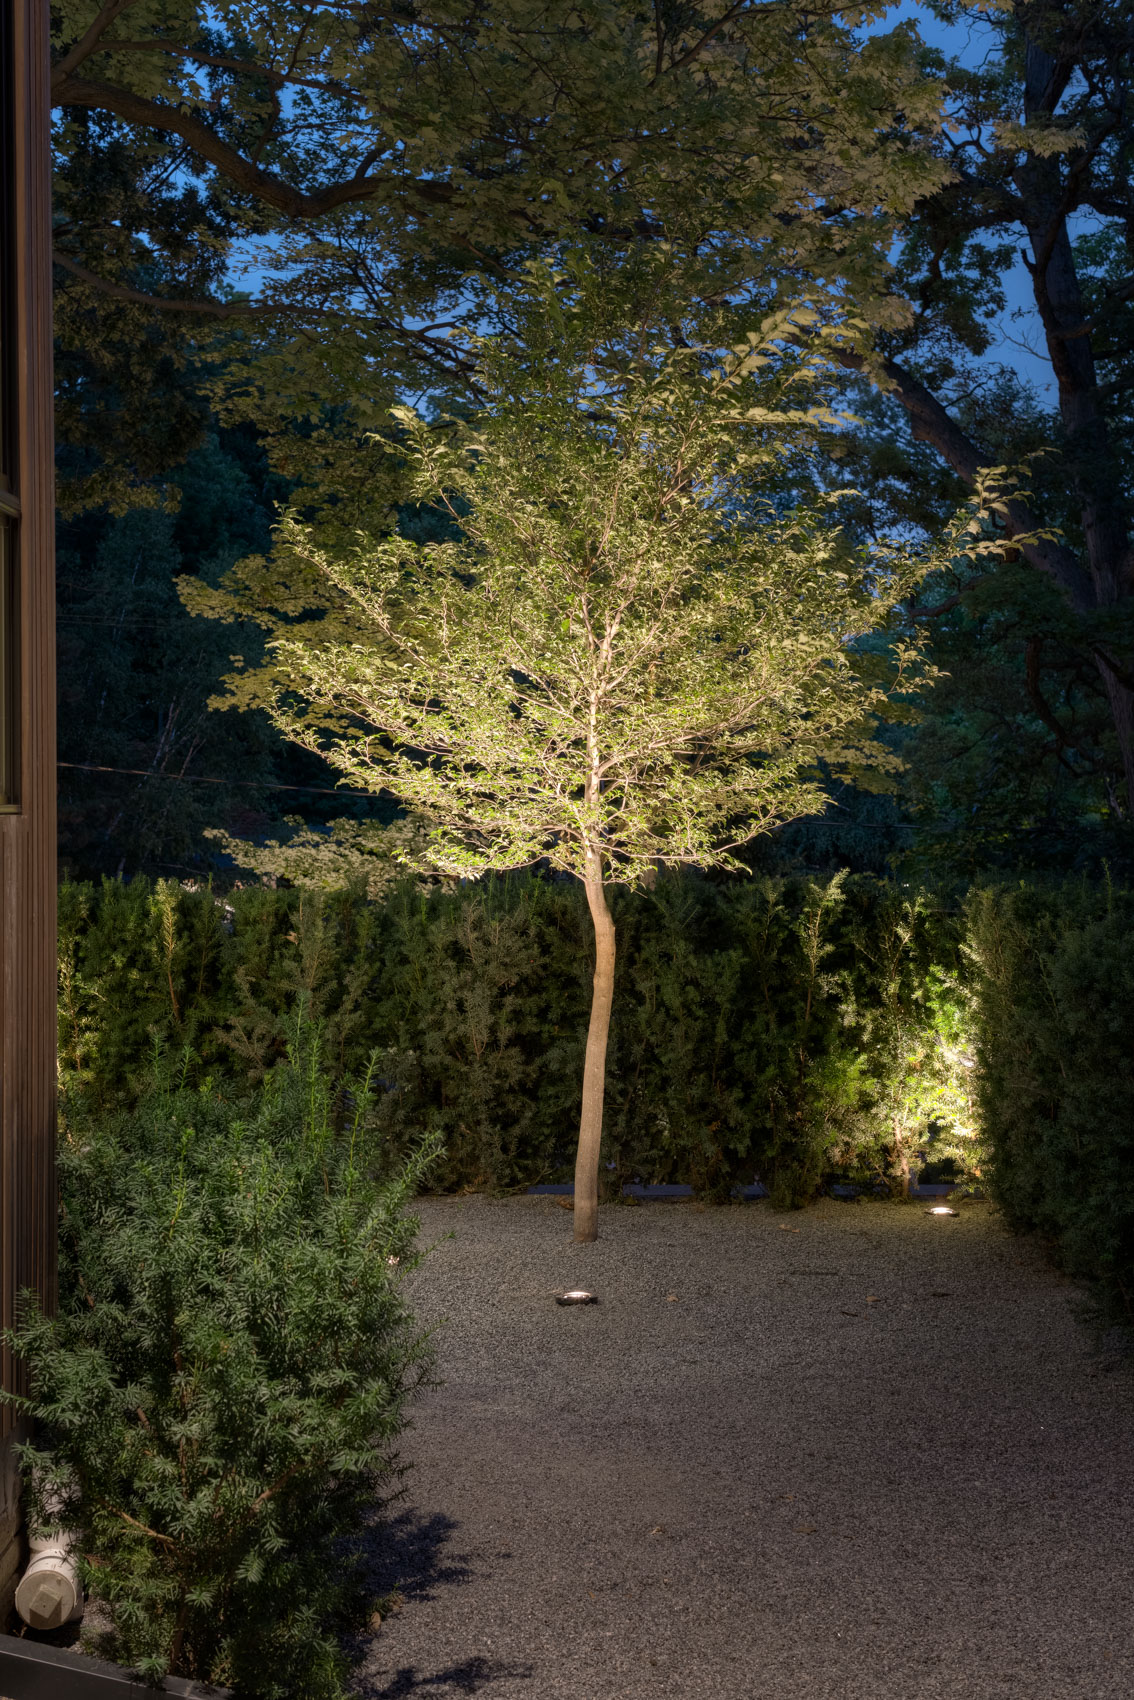 Landscape lighting up feature tree